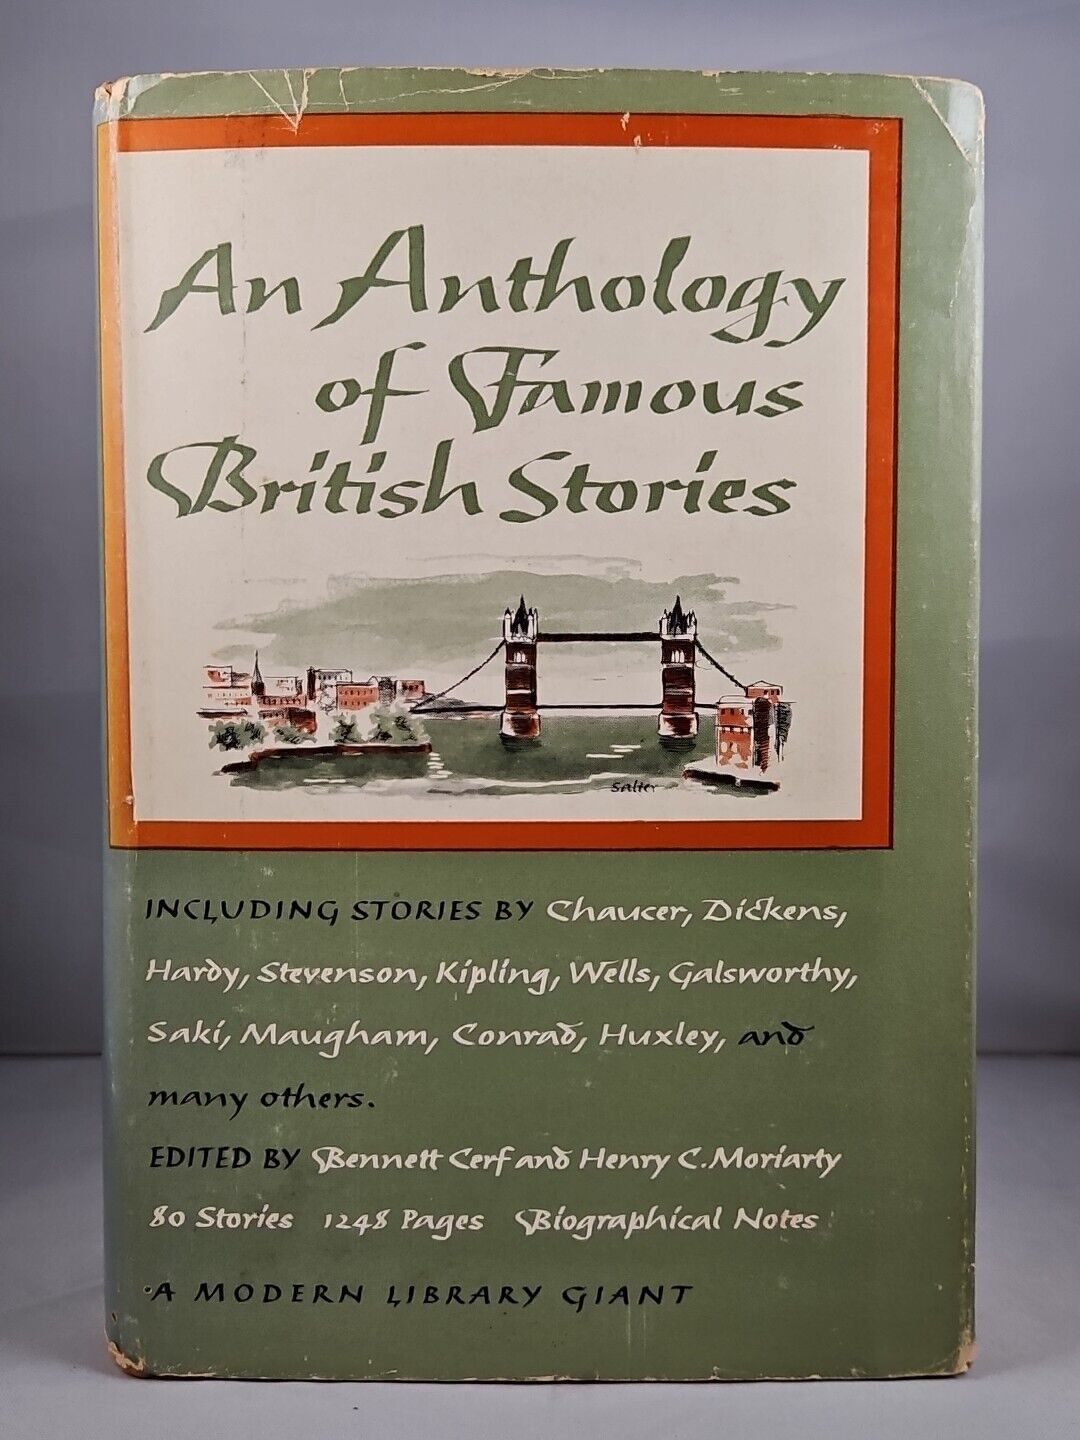 An Anthology of Famous British Stories (1940) Modern Library Giant G54 Hardcover